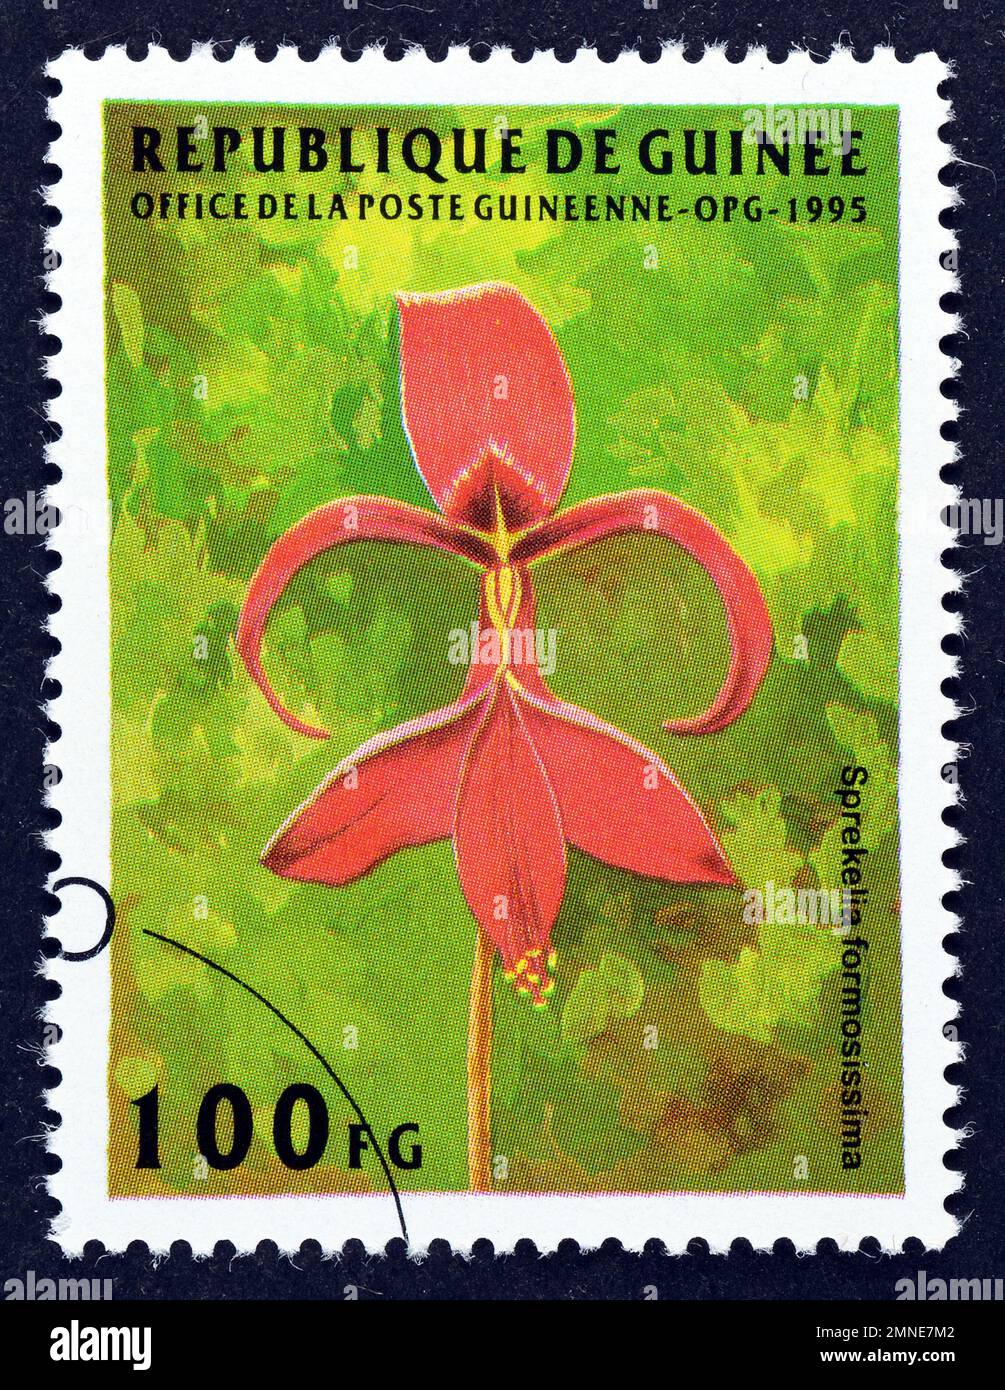 Cancelled postage stamp printed by Guinea, that shows Sprekelia formosissima - Aztec Lily flower, circa 1995. Stock Photo